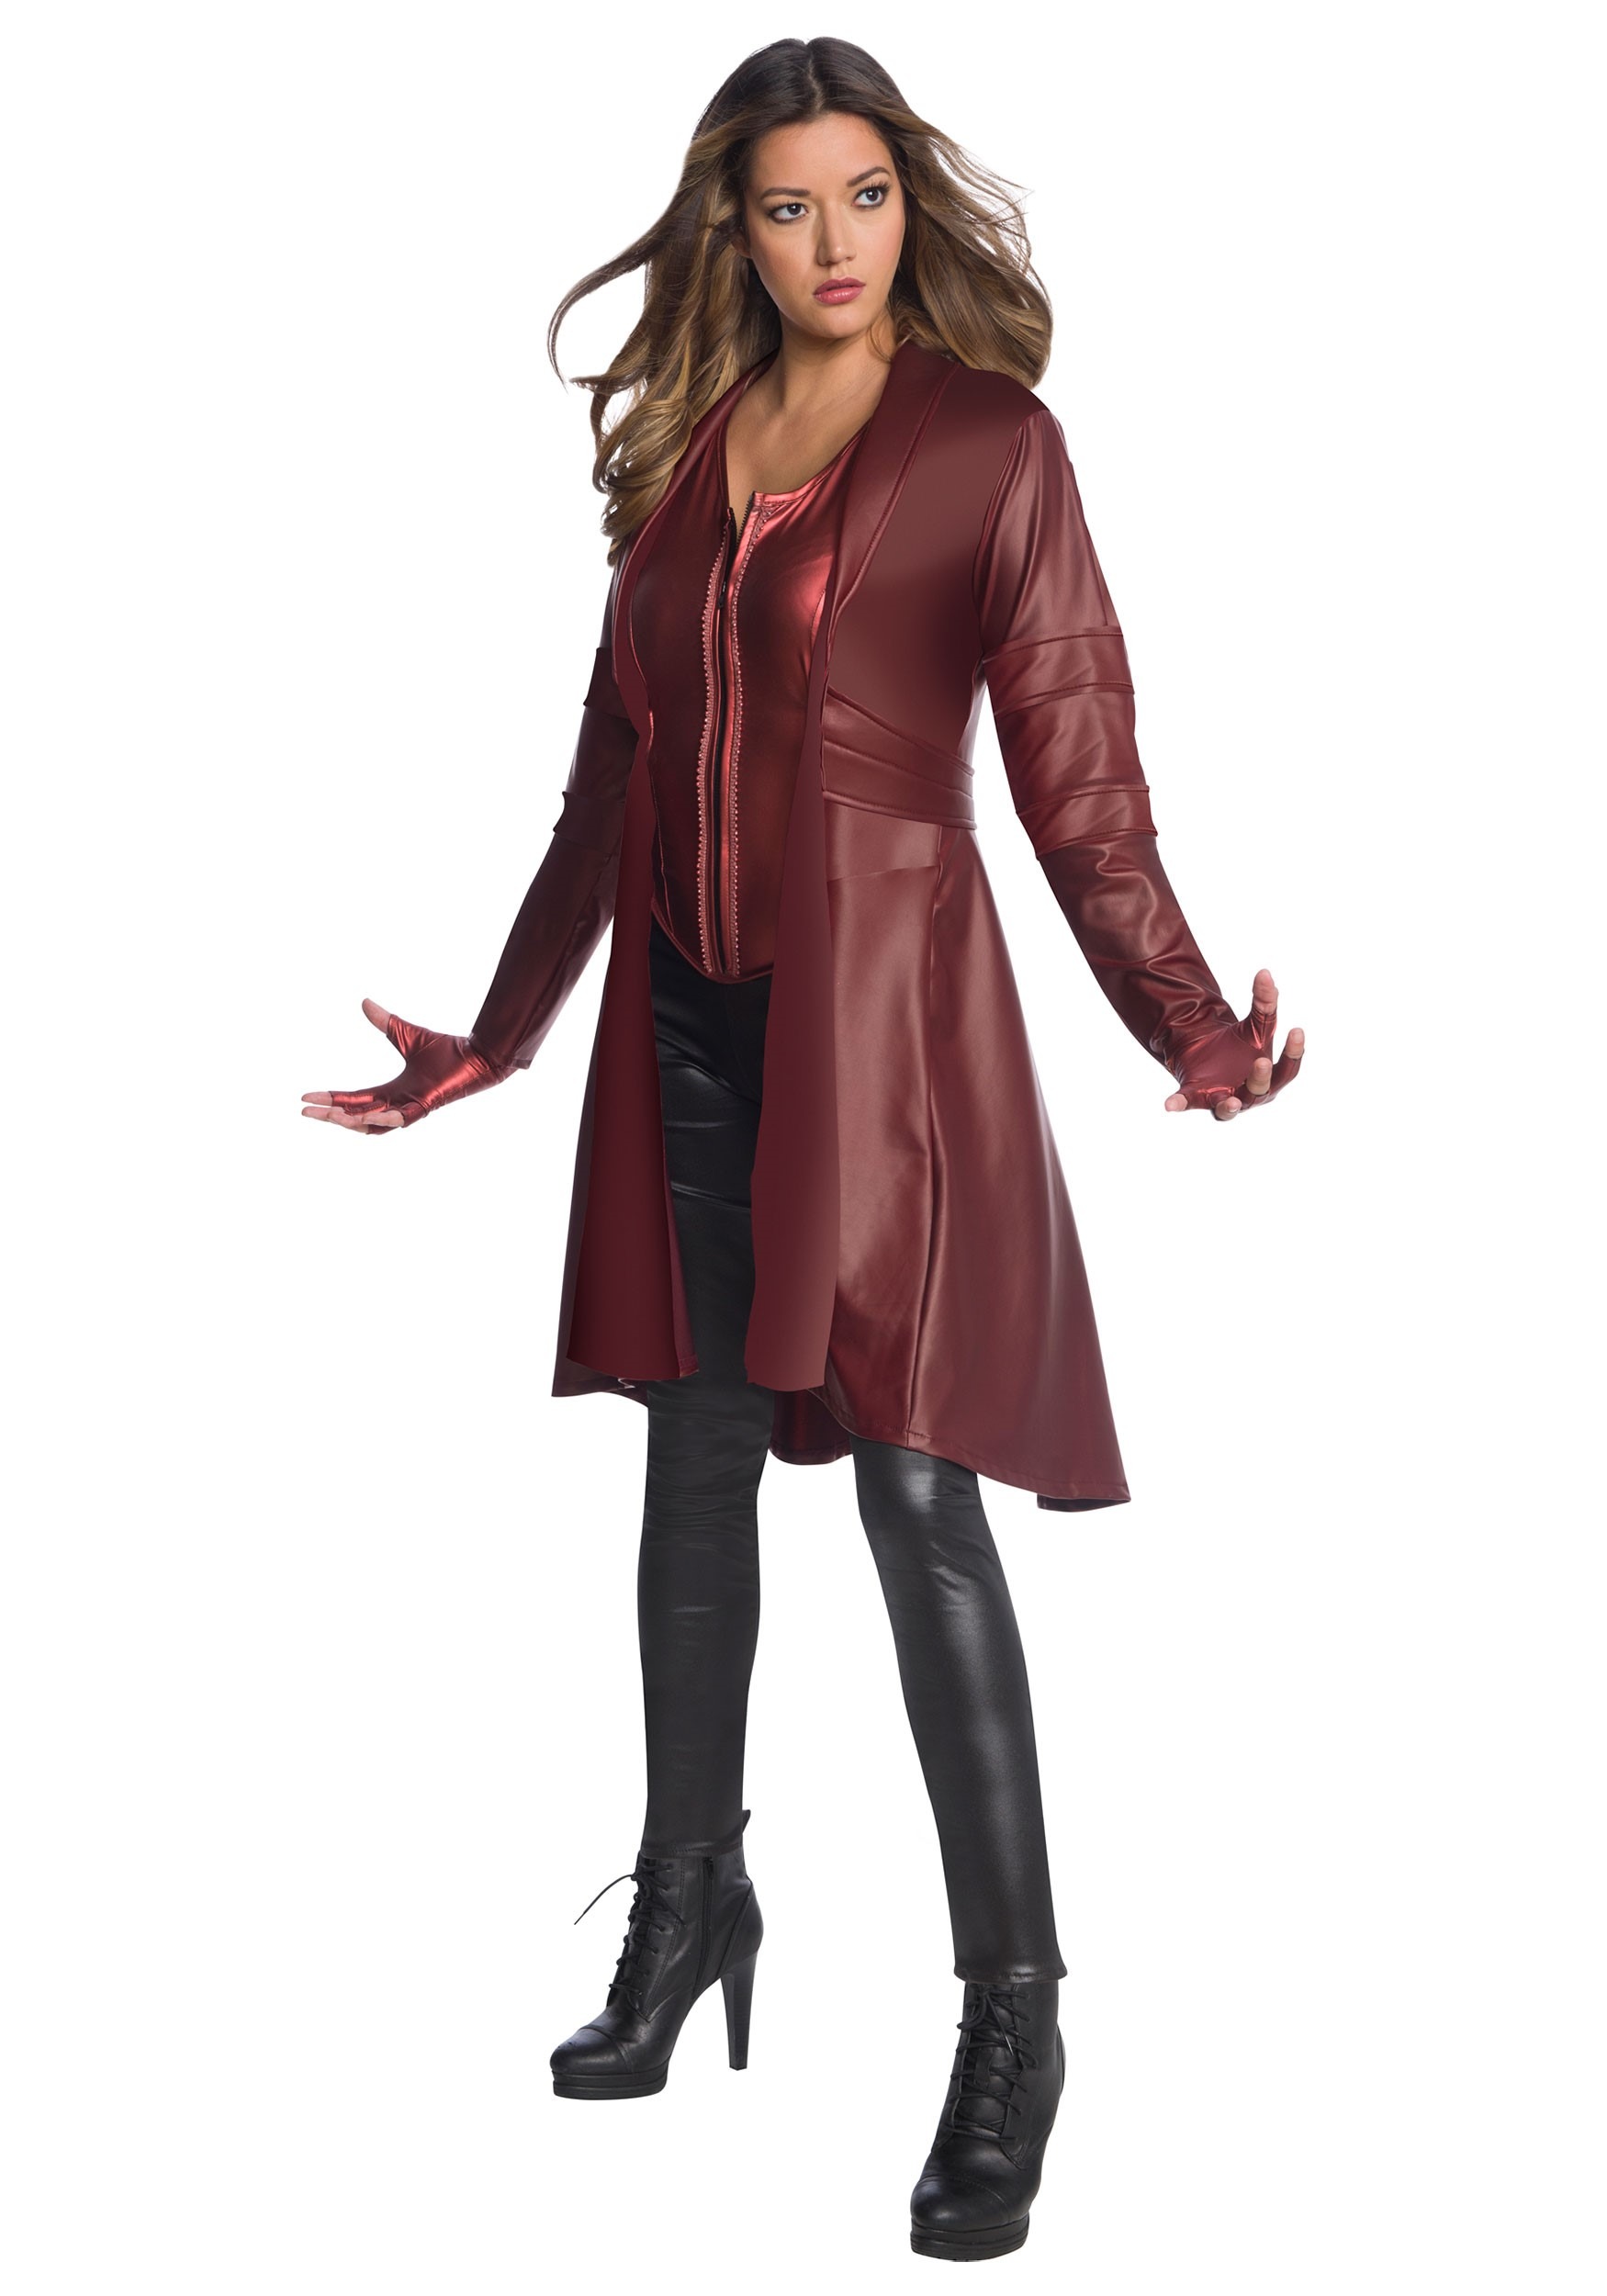 Avengers Endgame Secret Wishes Scarlet Witch Women’s Costume